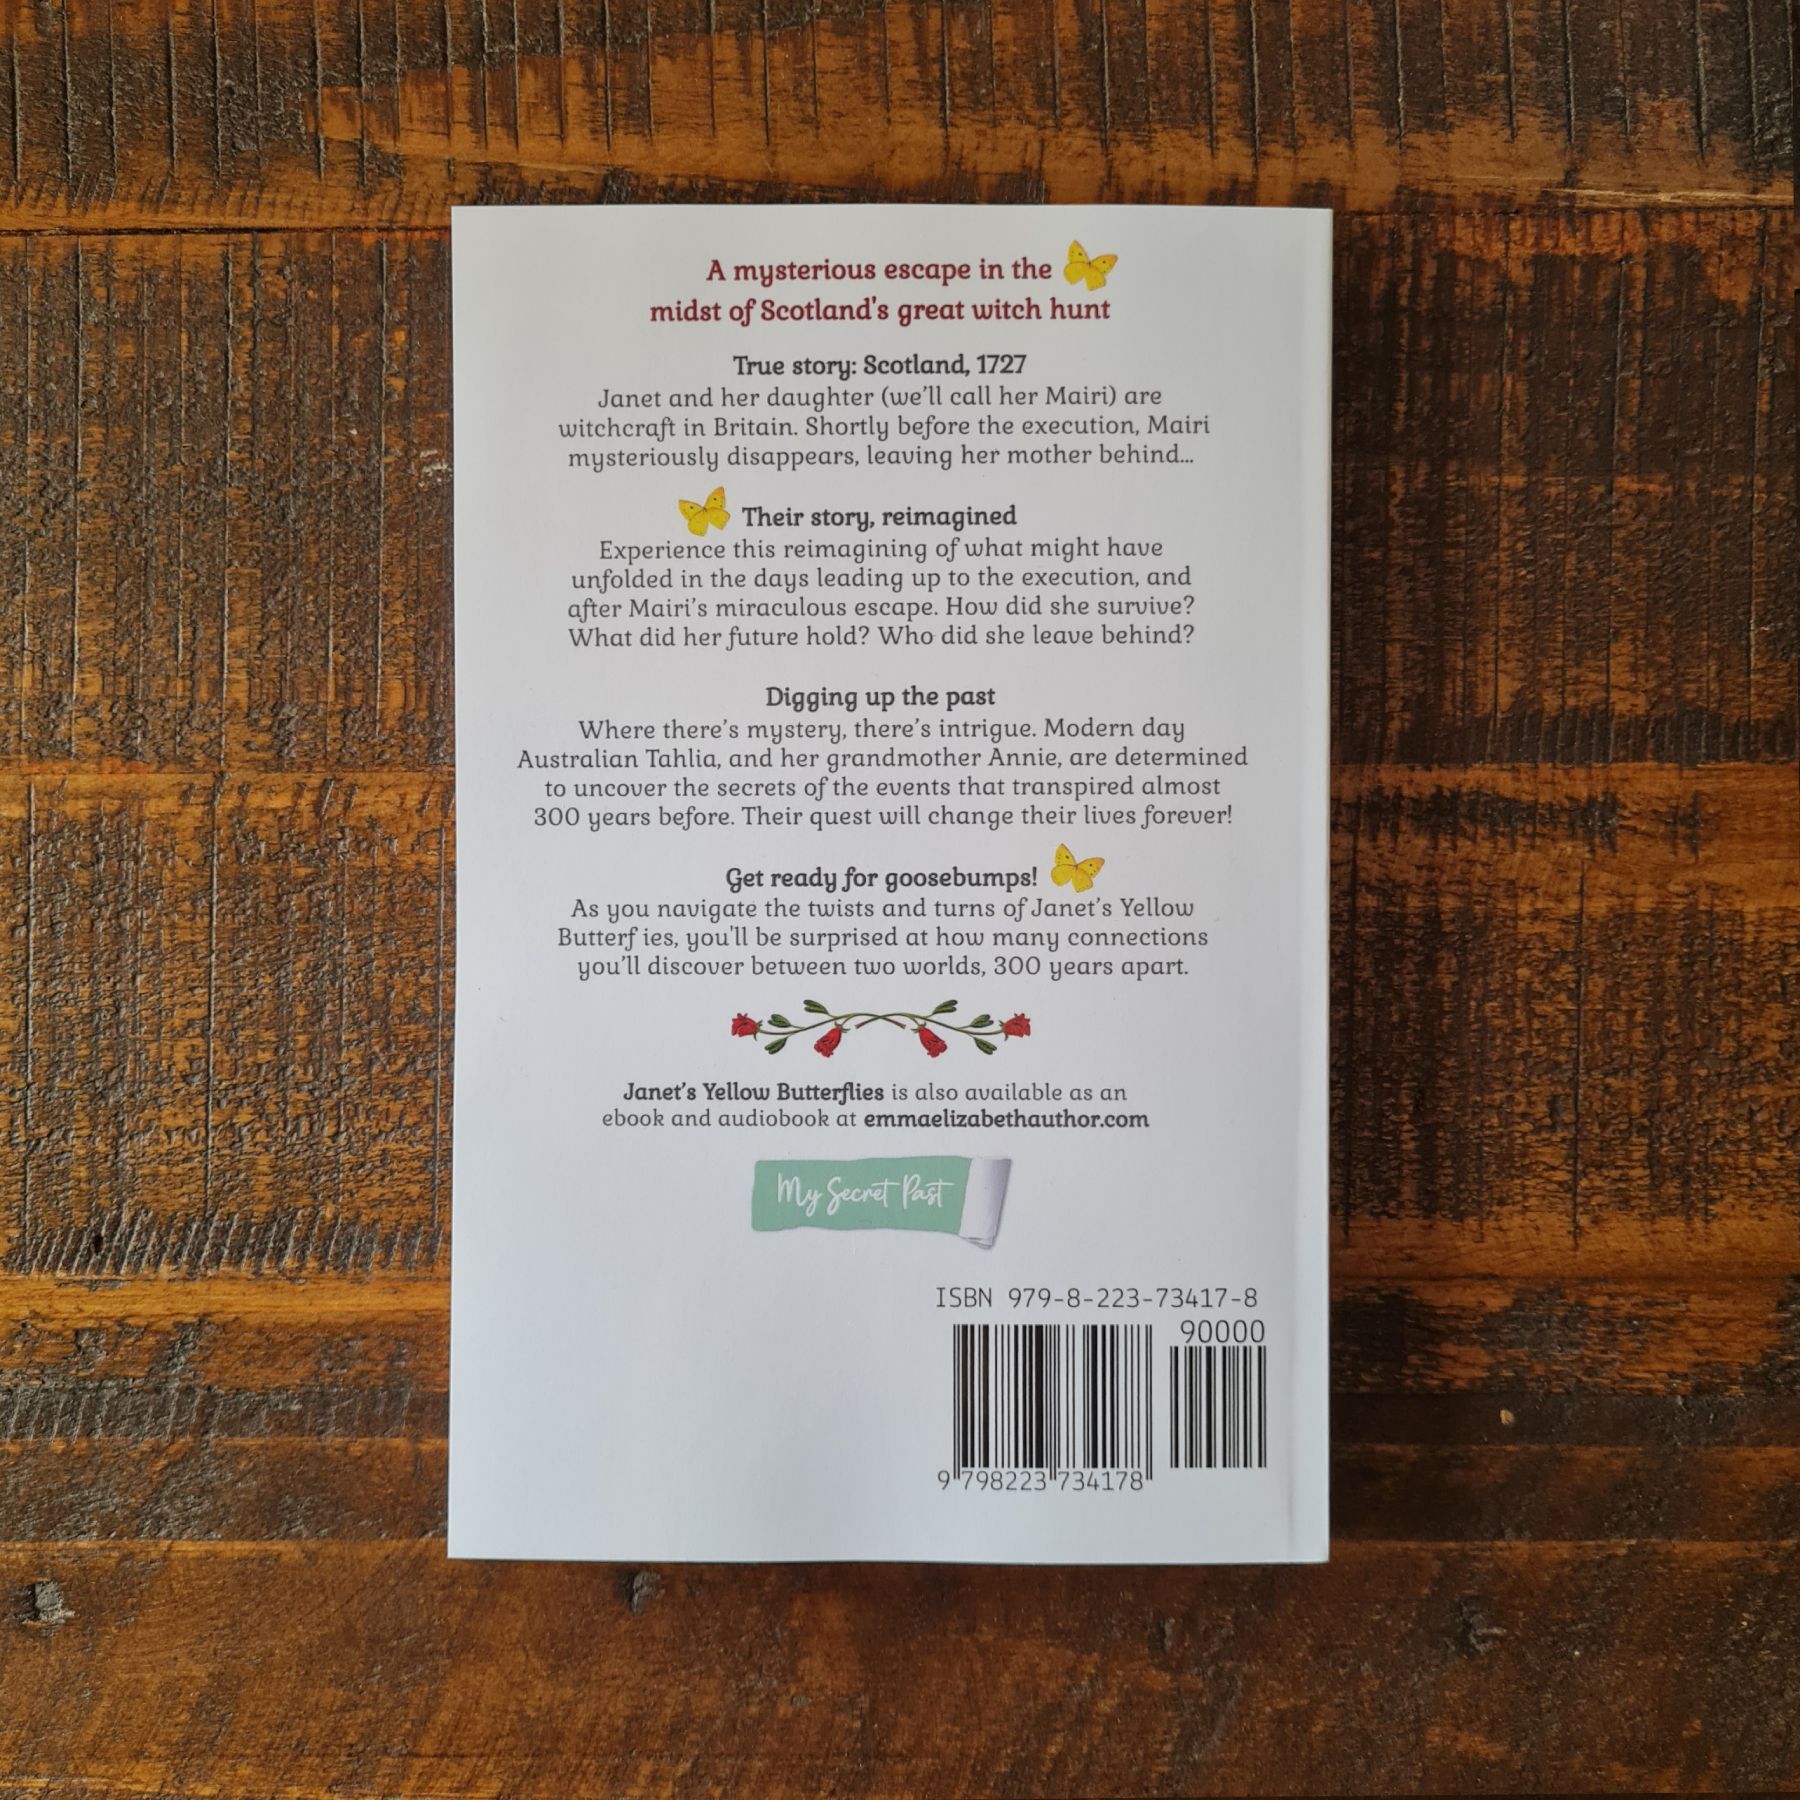 Janet's Yellow Butterflies printed proof - back cover